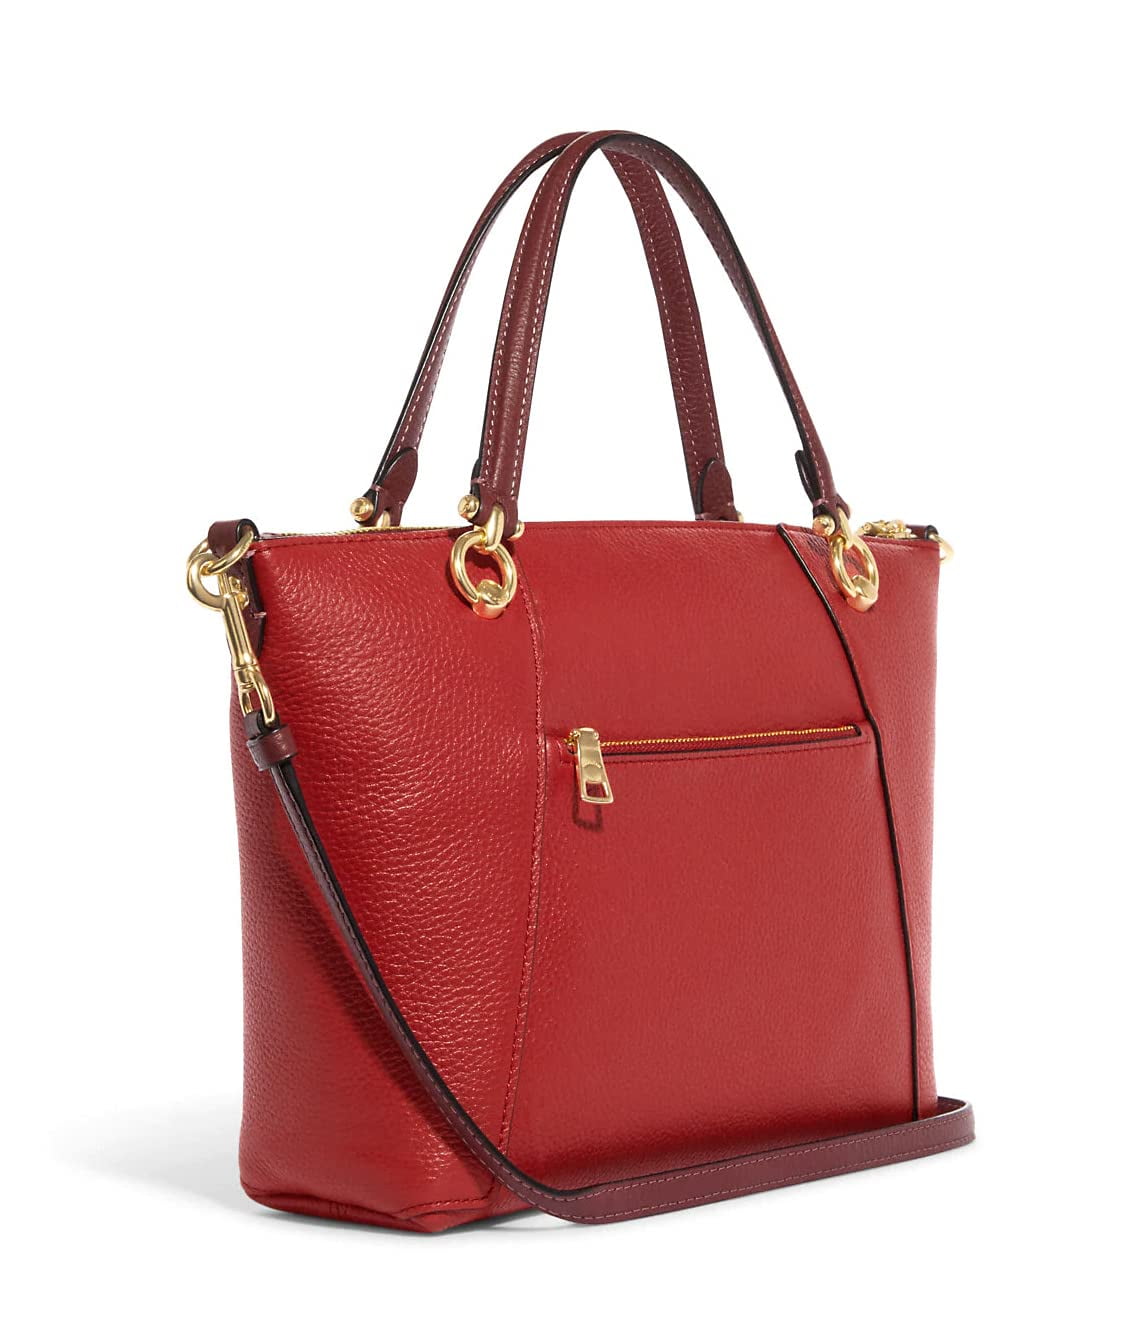 Coach Kacey Satchel In Colorblock Bag Red Apple Pebble Leather Crossbody Bag